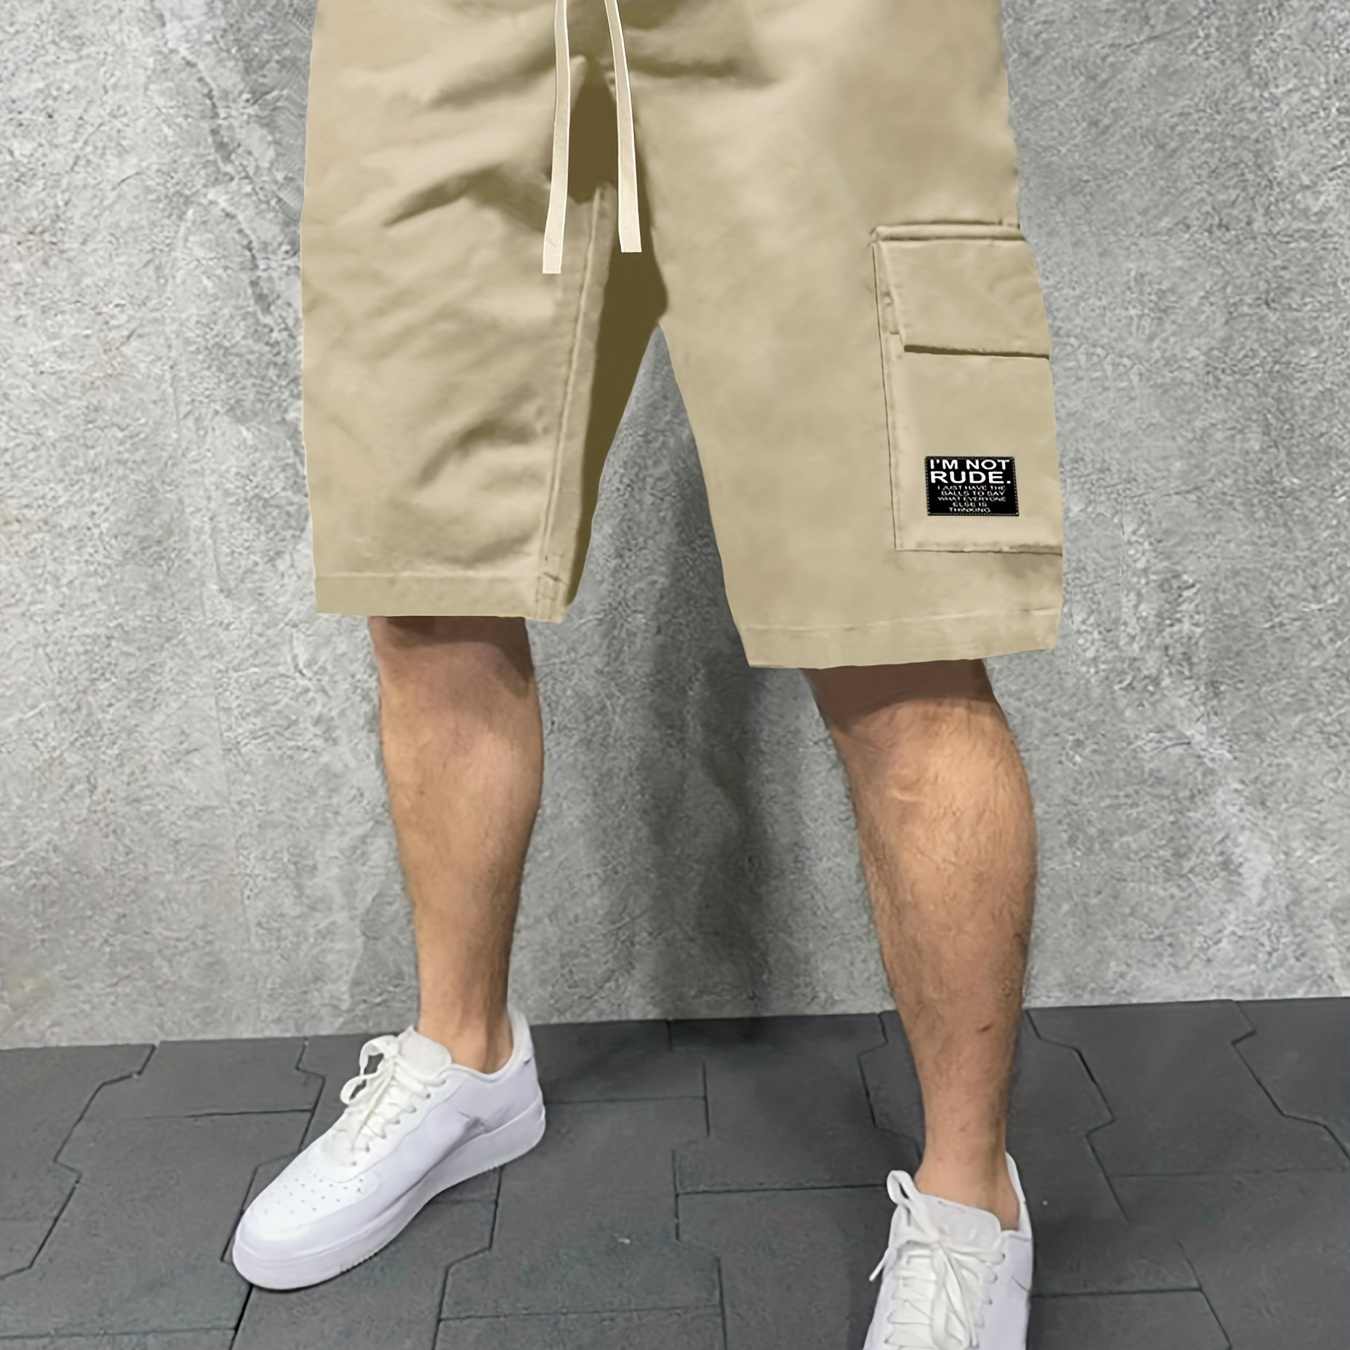 

I'm Not Rude, Classic Men's Cargo Shorts With Big Pockets, For Summer Causal Wear